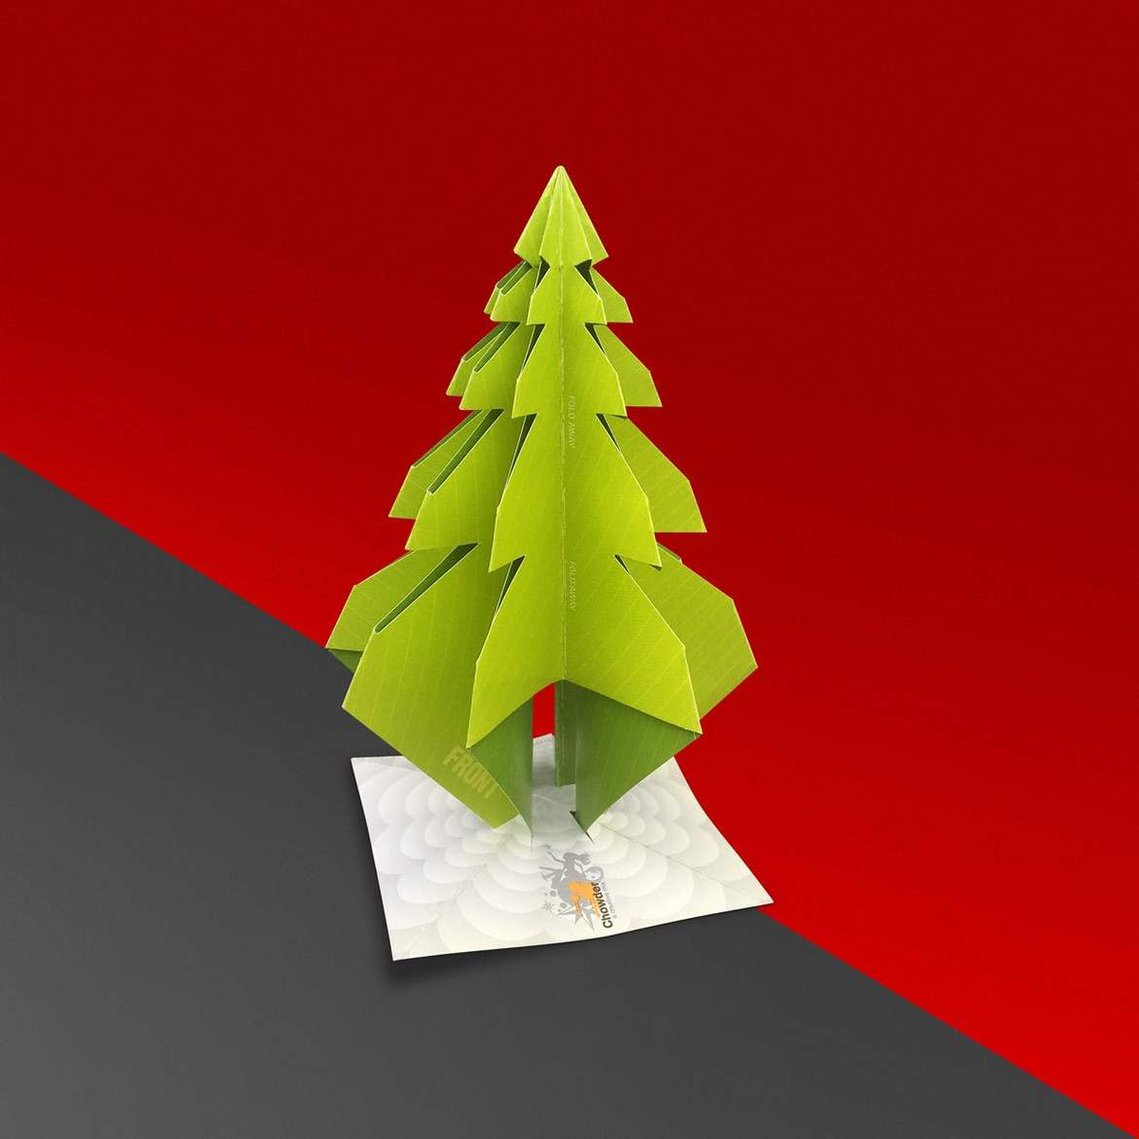 3D Holiday Tree, promotional material. Chowder, Inc.